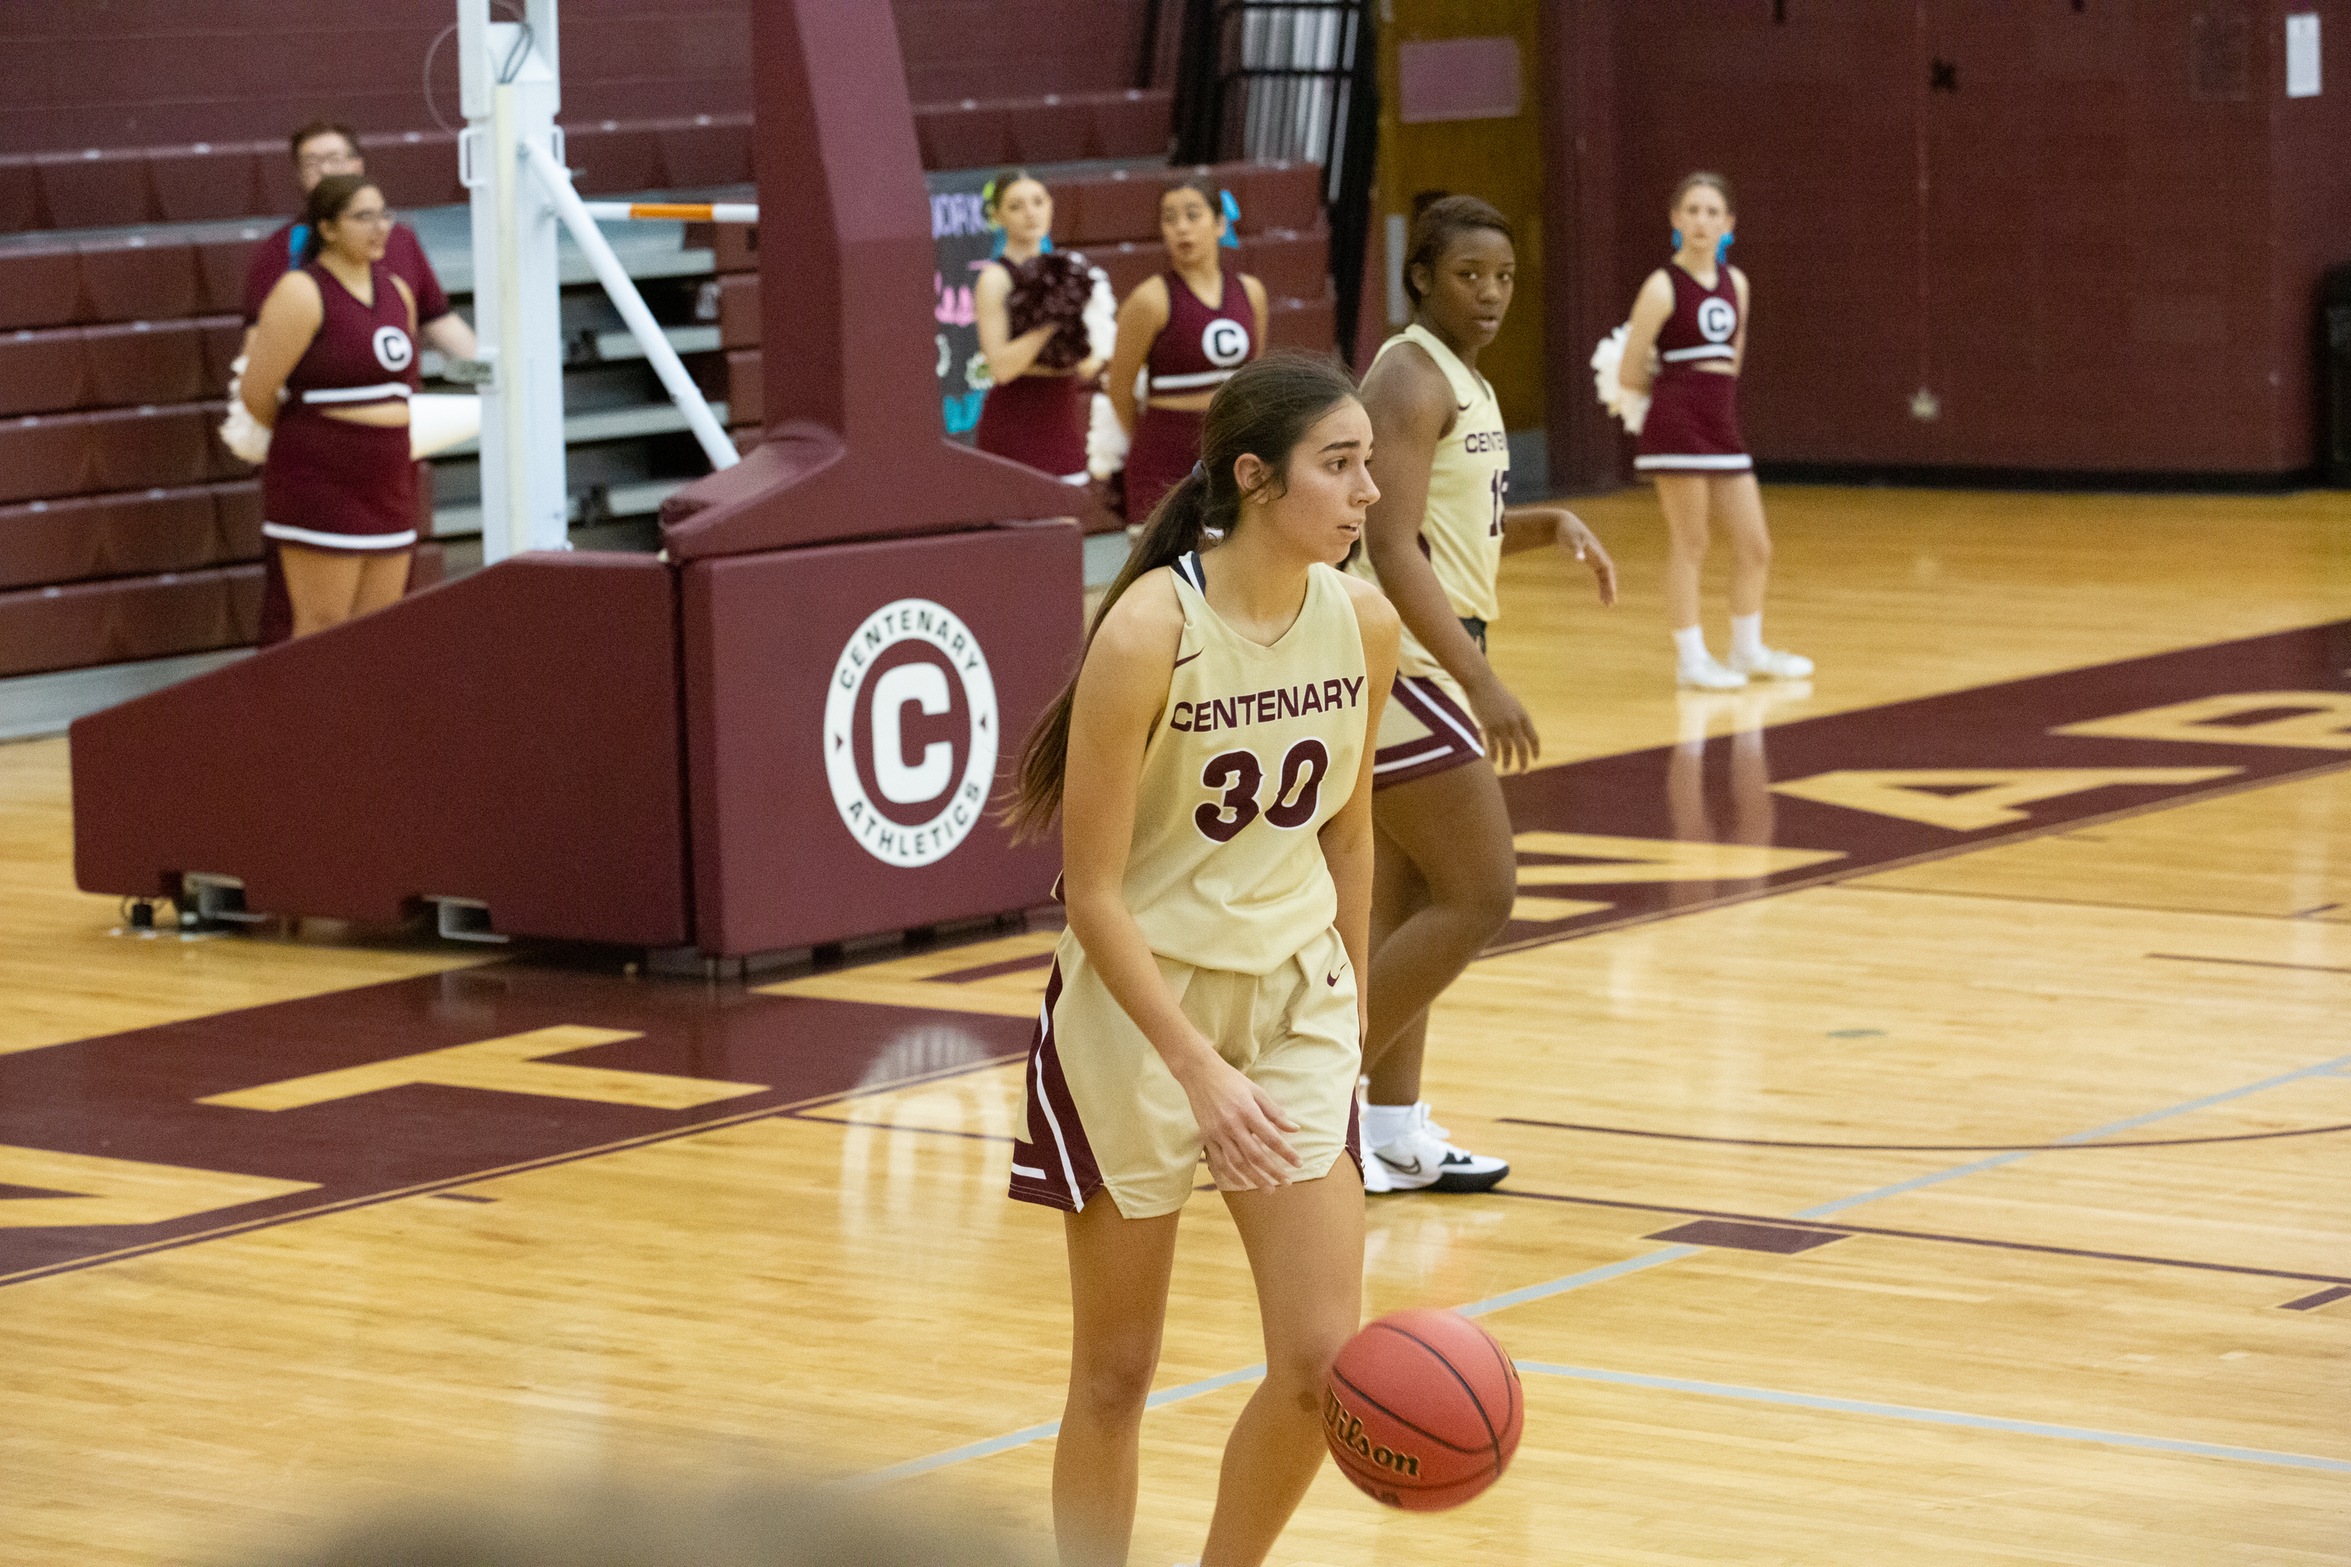 Ladies Fall At Home To Belhaven On Saturday, 62-51